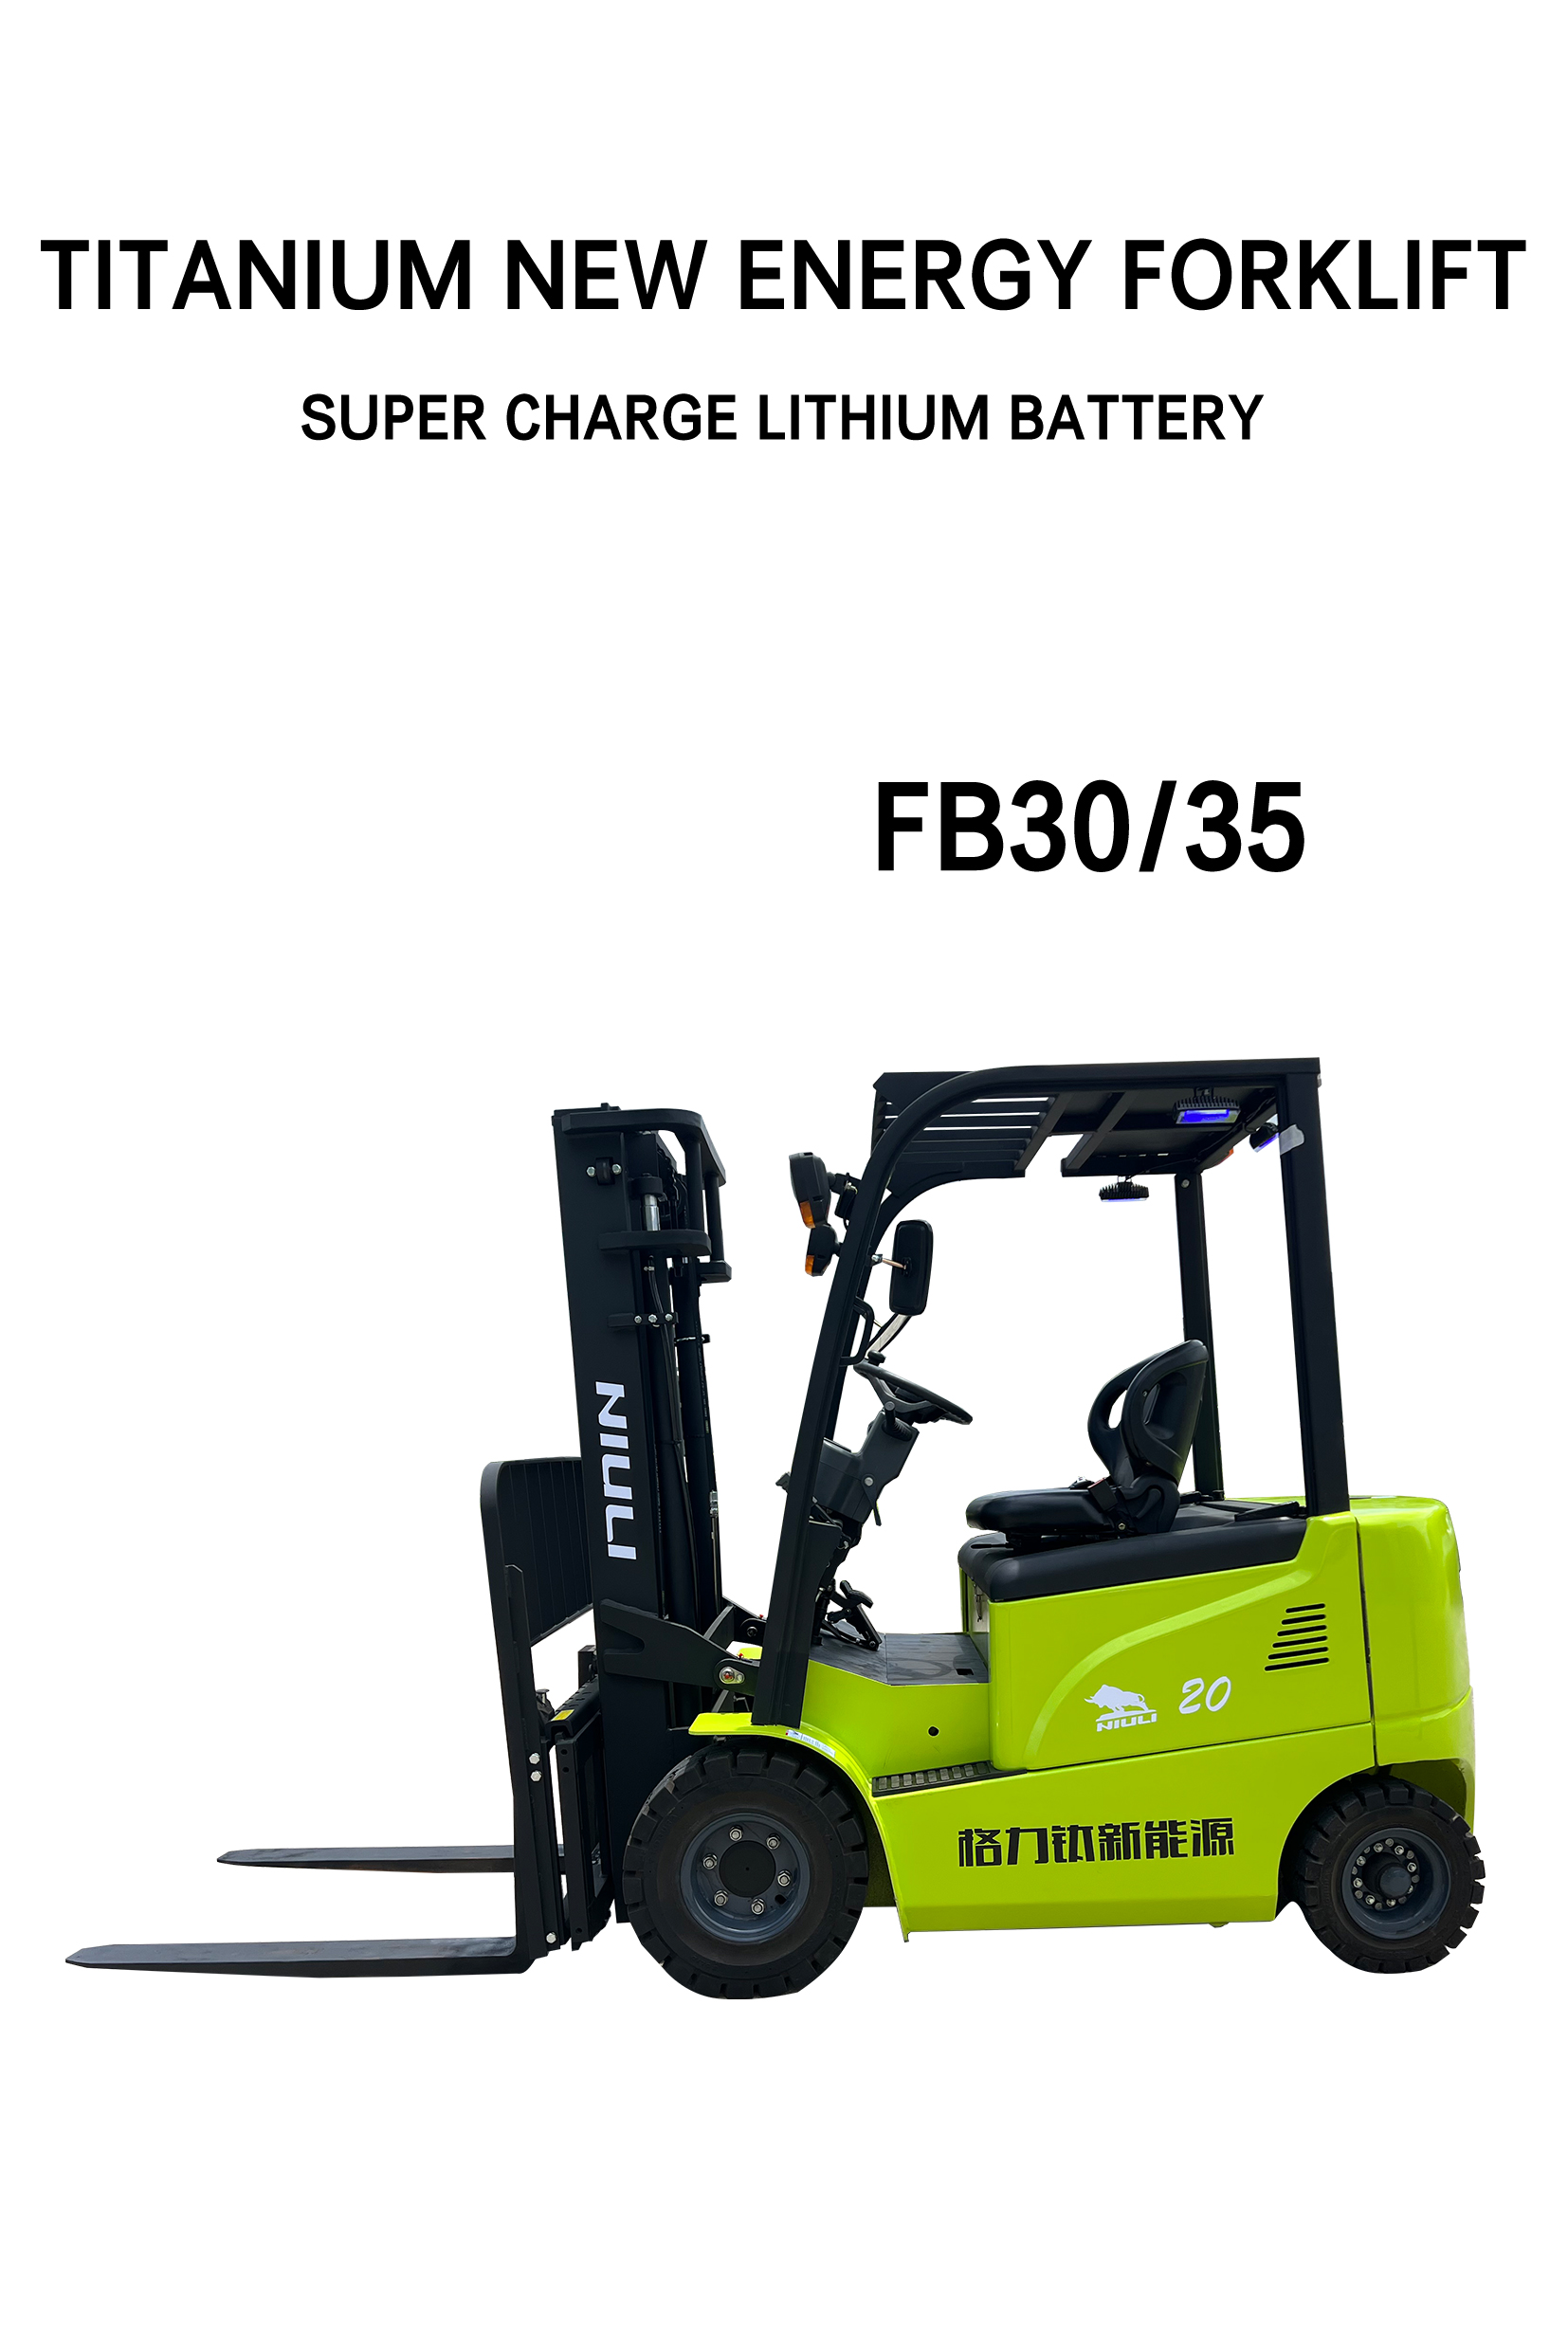 Why Choose an ELECTRIC FORKLIFT?